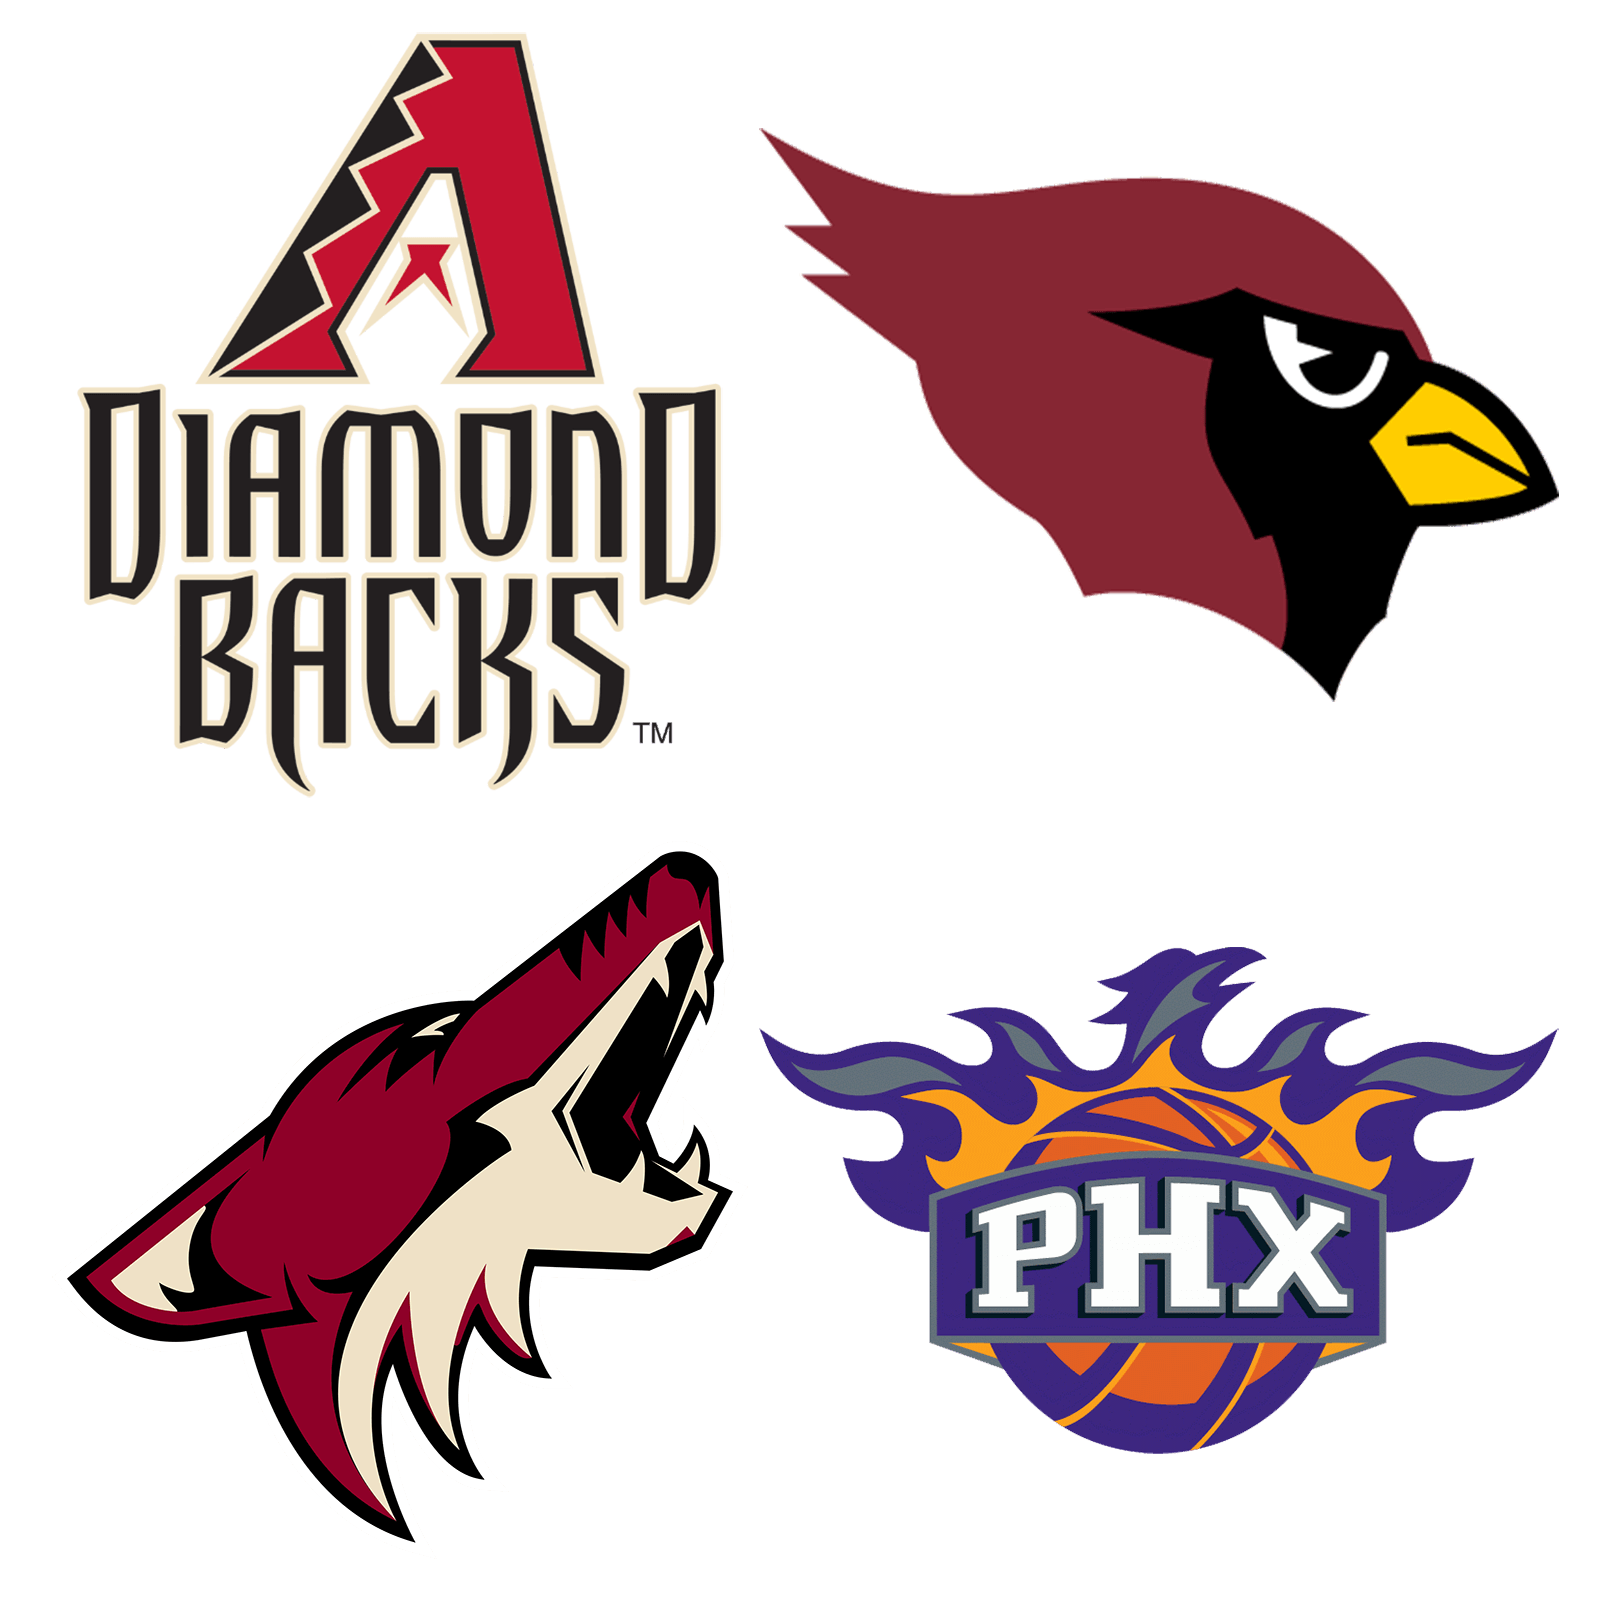 Arizona Football Team Logo - Is Phoenix the Most Dysfunctional Sports Town in America?